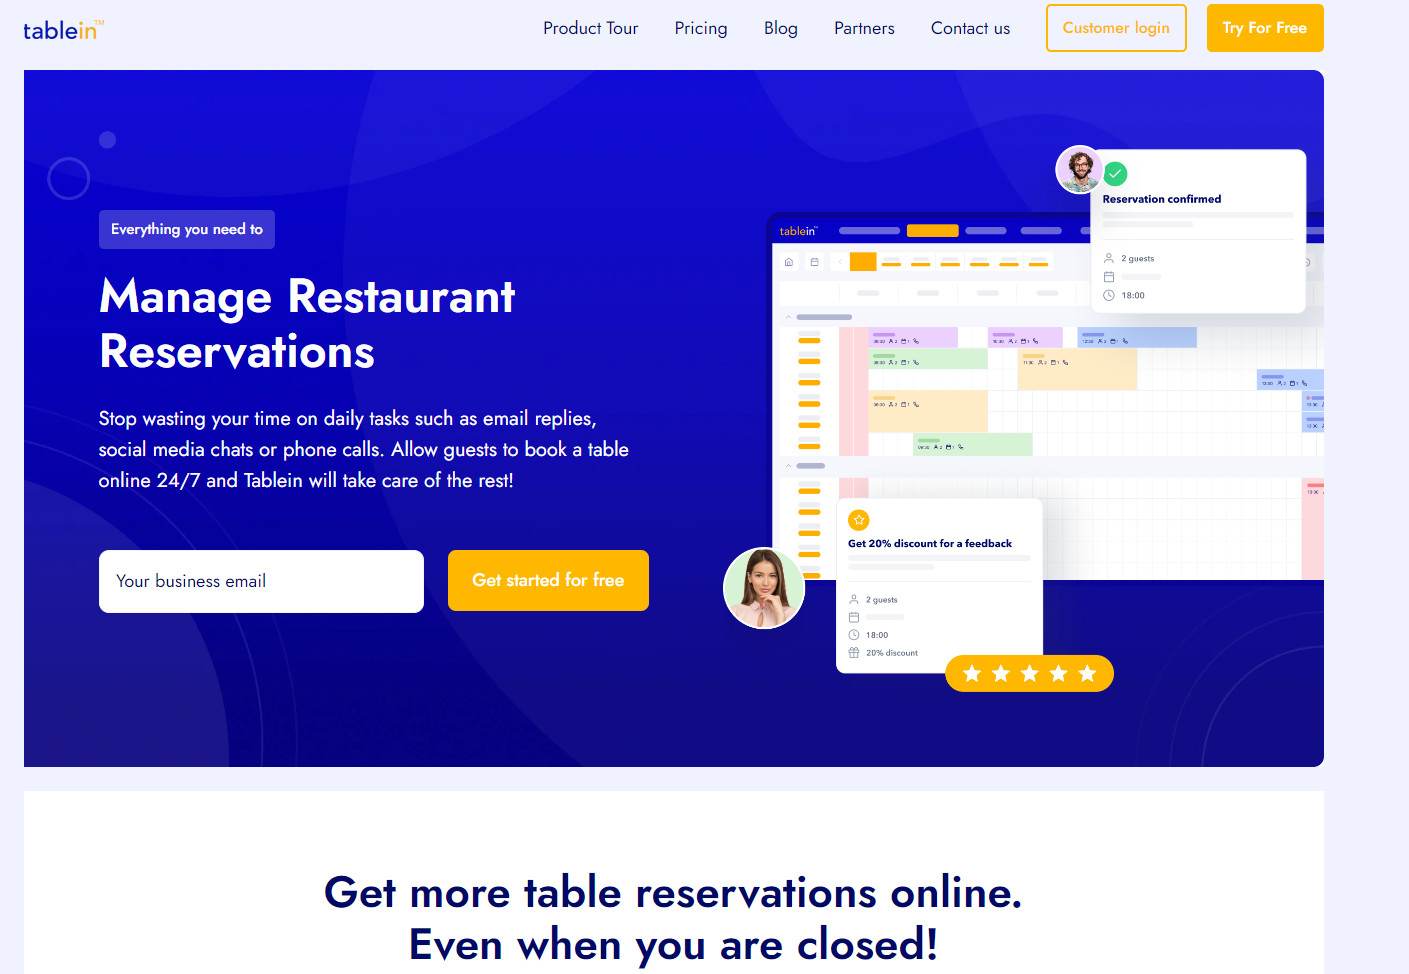  TableIn is a waitlist restaurant app that takes away a restaurant’s waiting area and replaces it with one powerful solution